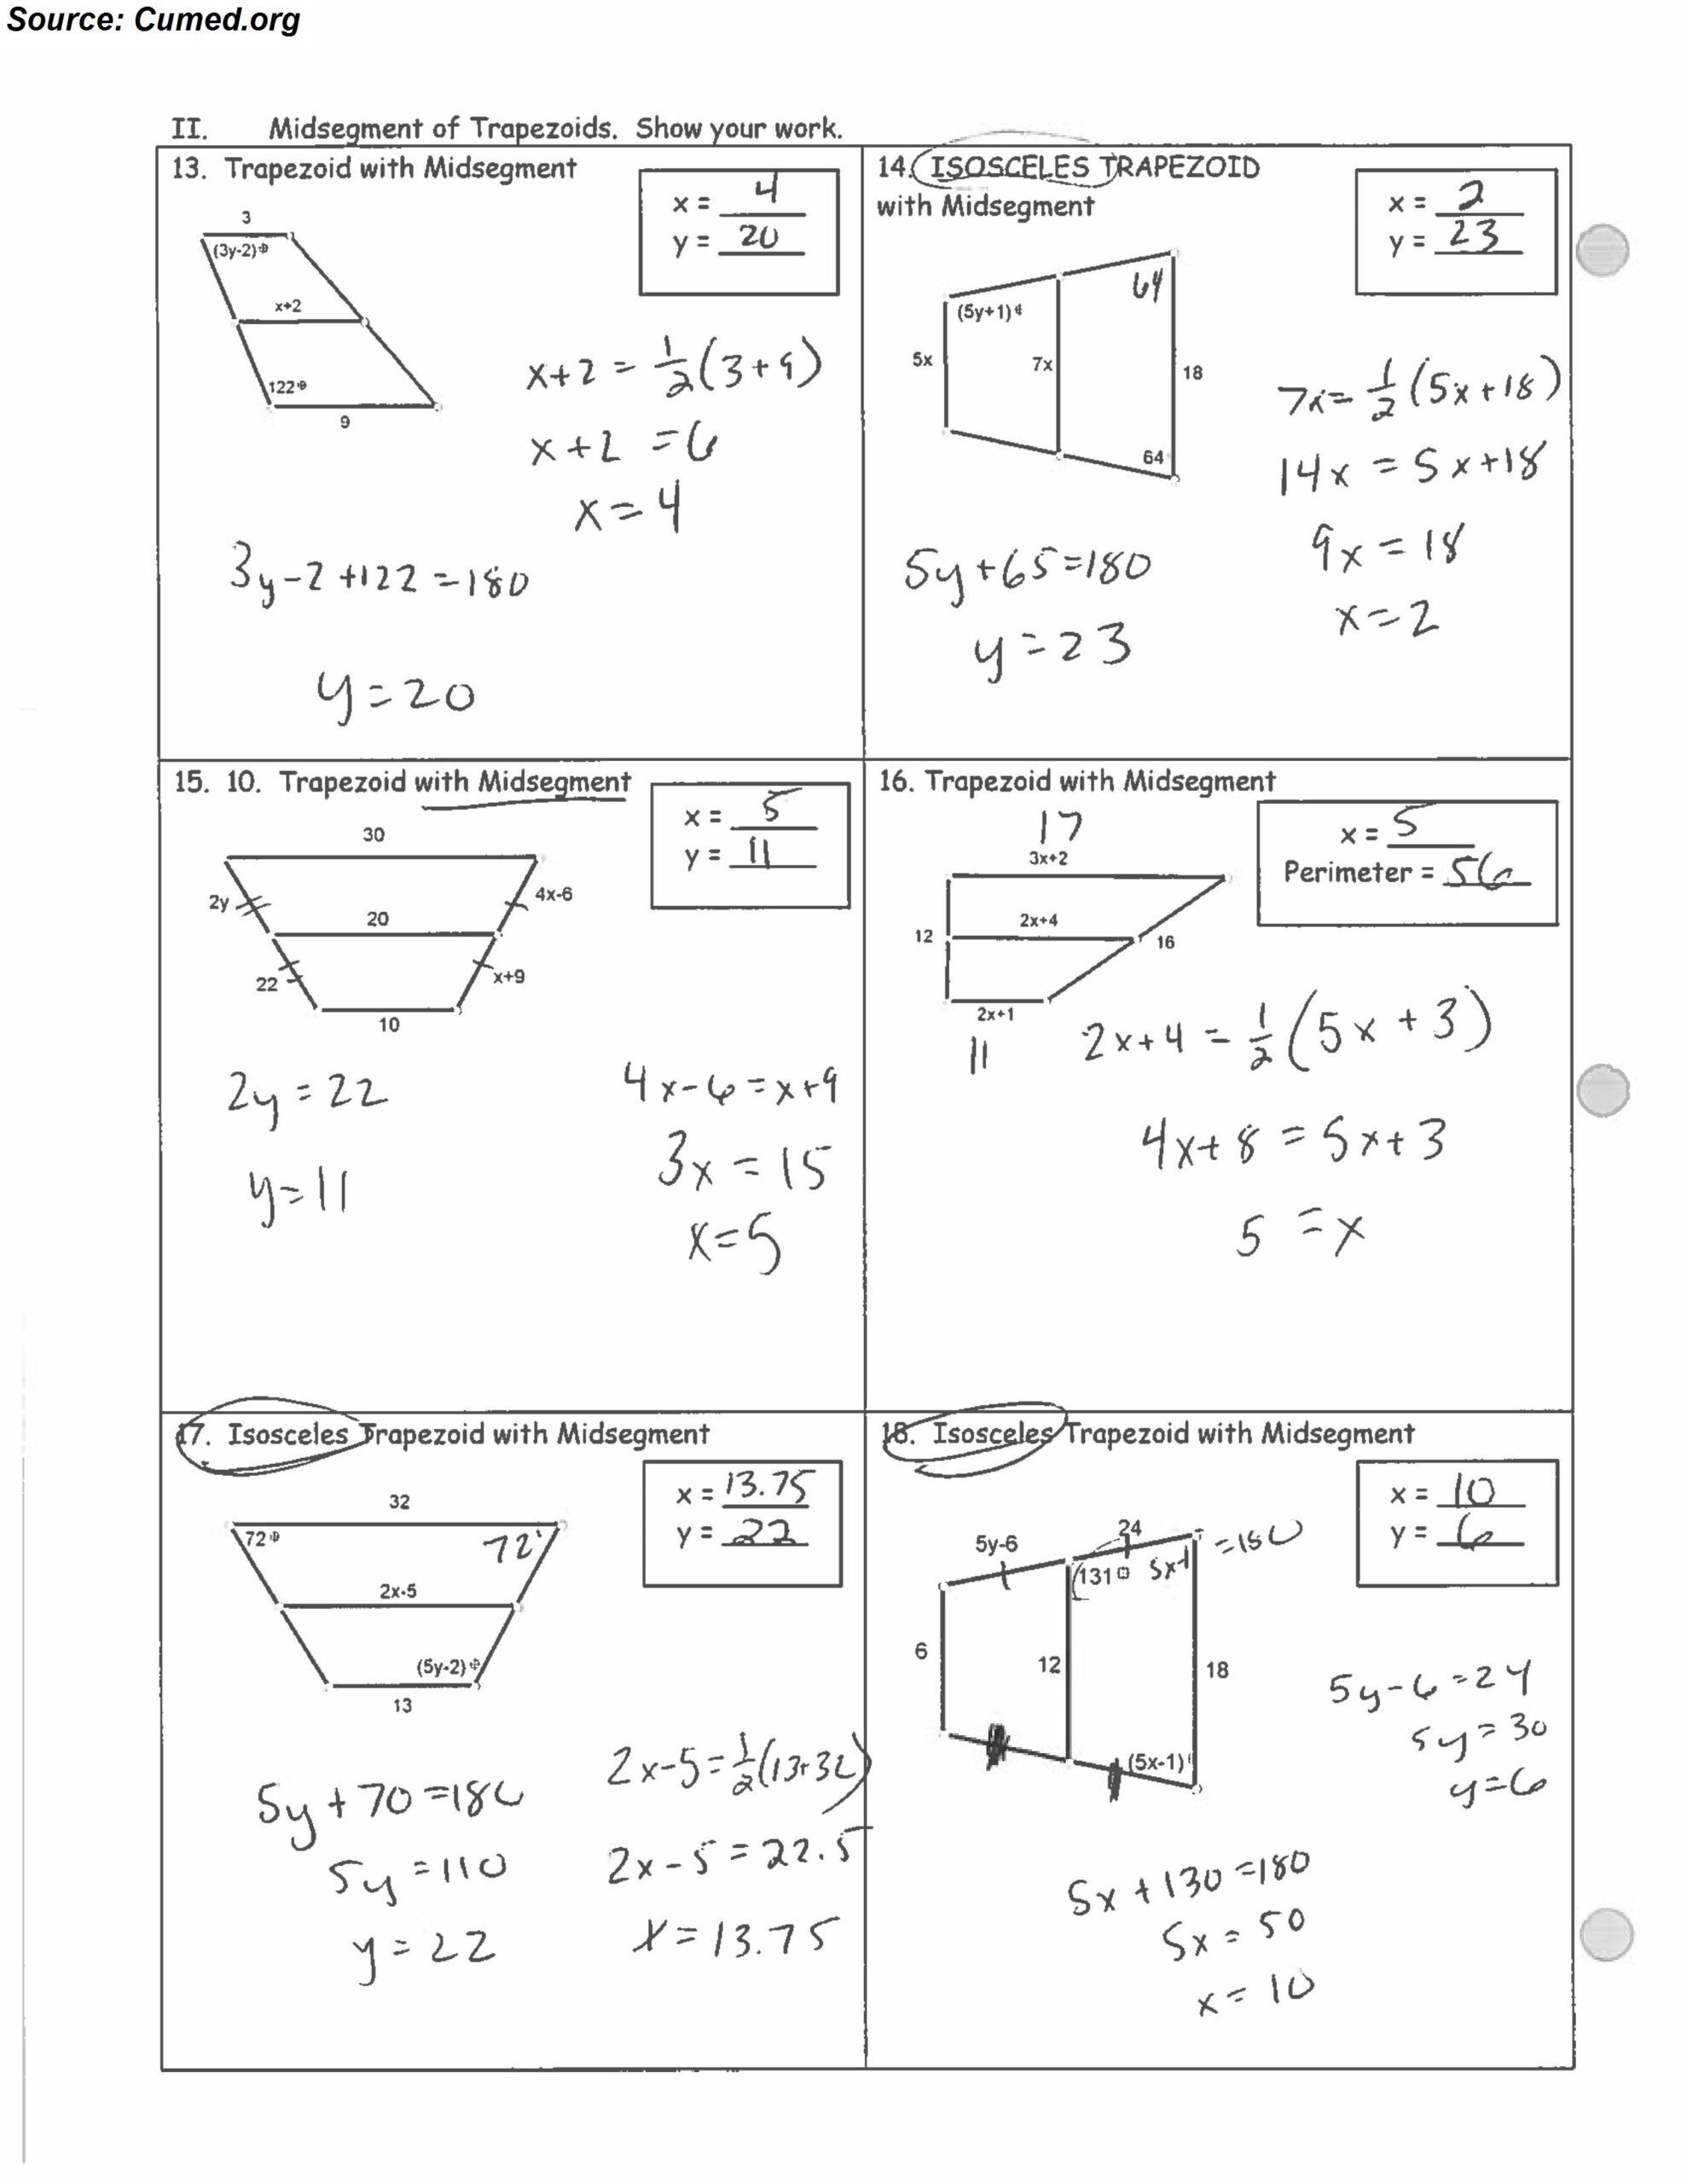 Geometry Worksheet Kites And Trapezoids With Answer Key